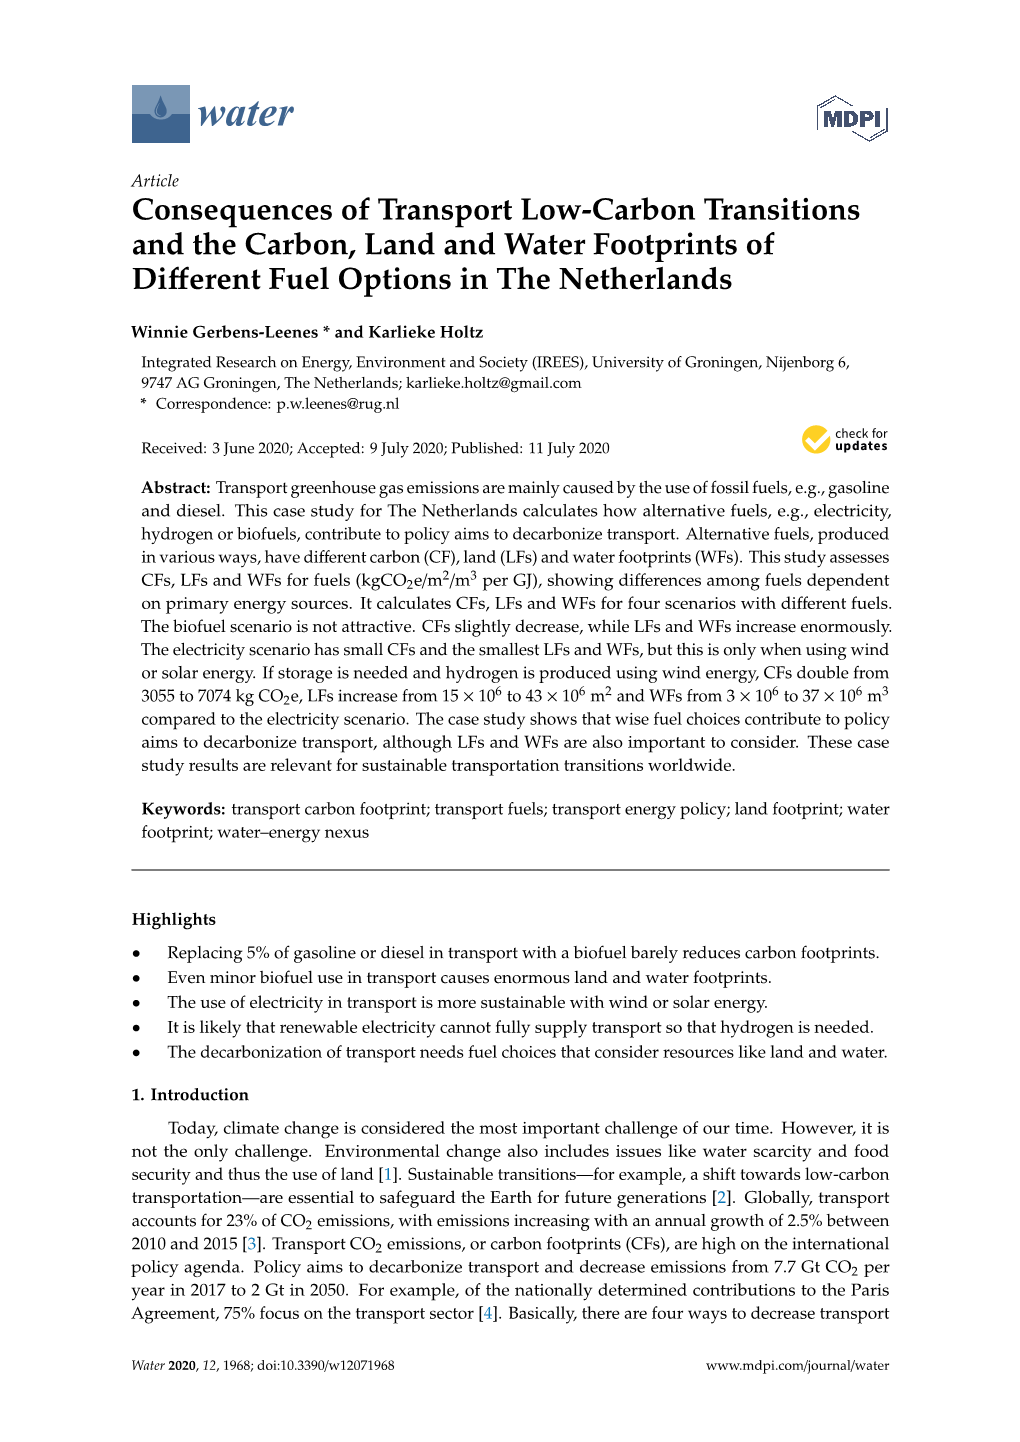 Consequences of Transport Low-Carbon Transitions and the Carbon, Land and Water Footprints of Diﬀerent Fuel Options in the Netherlands